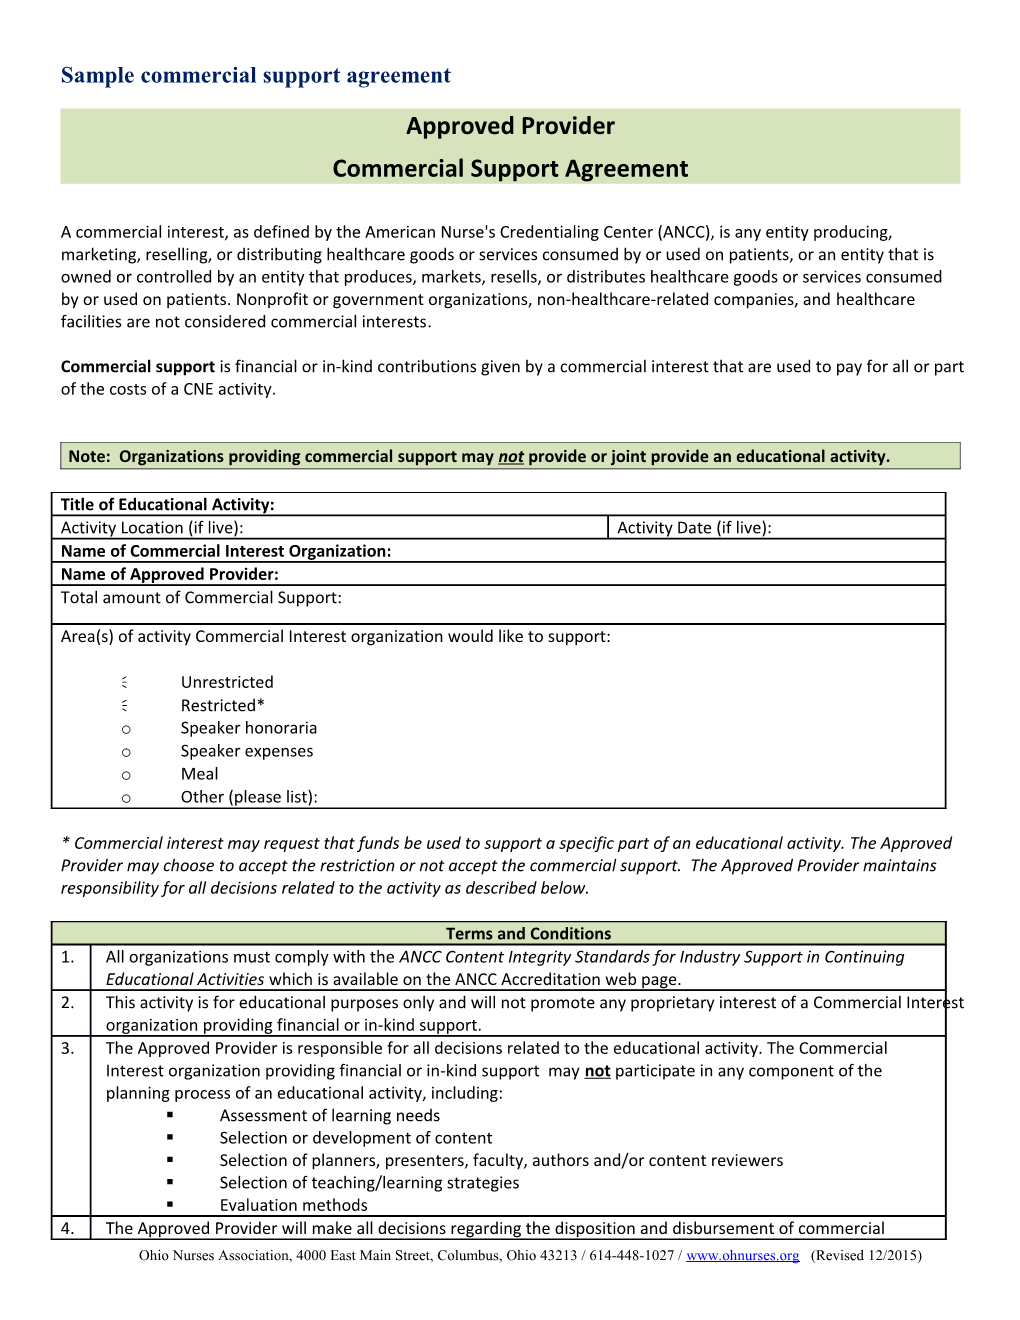 Sample Commercial Support Agreement